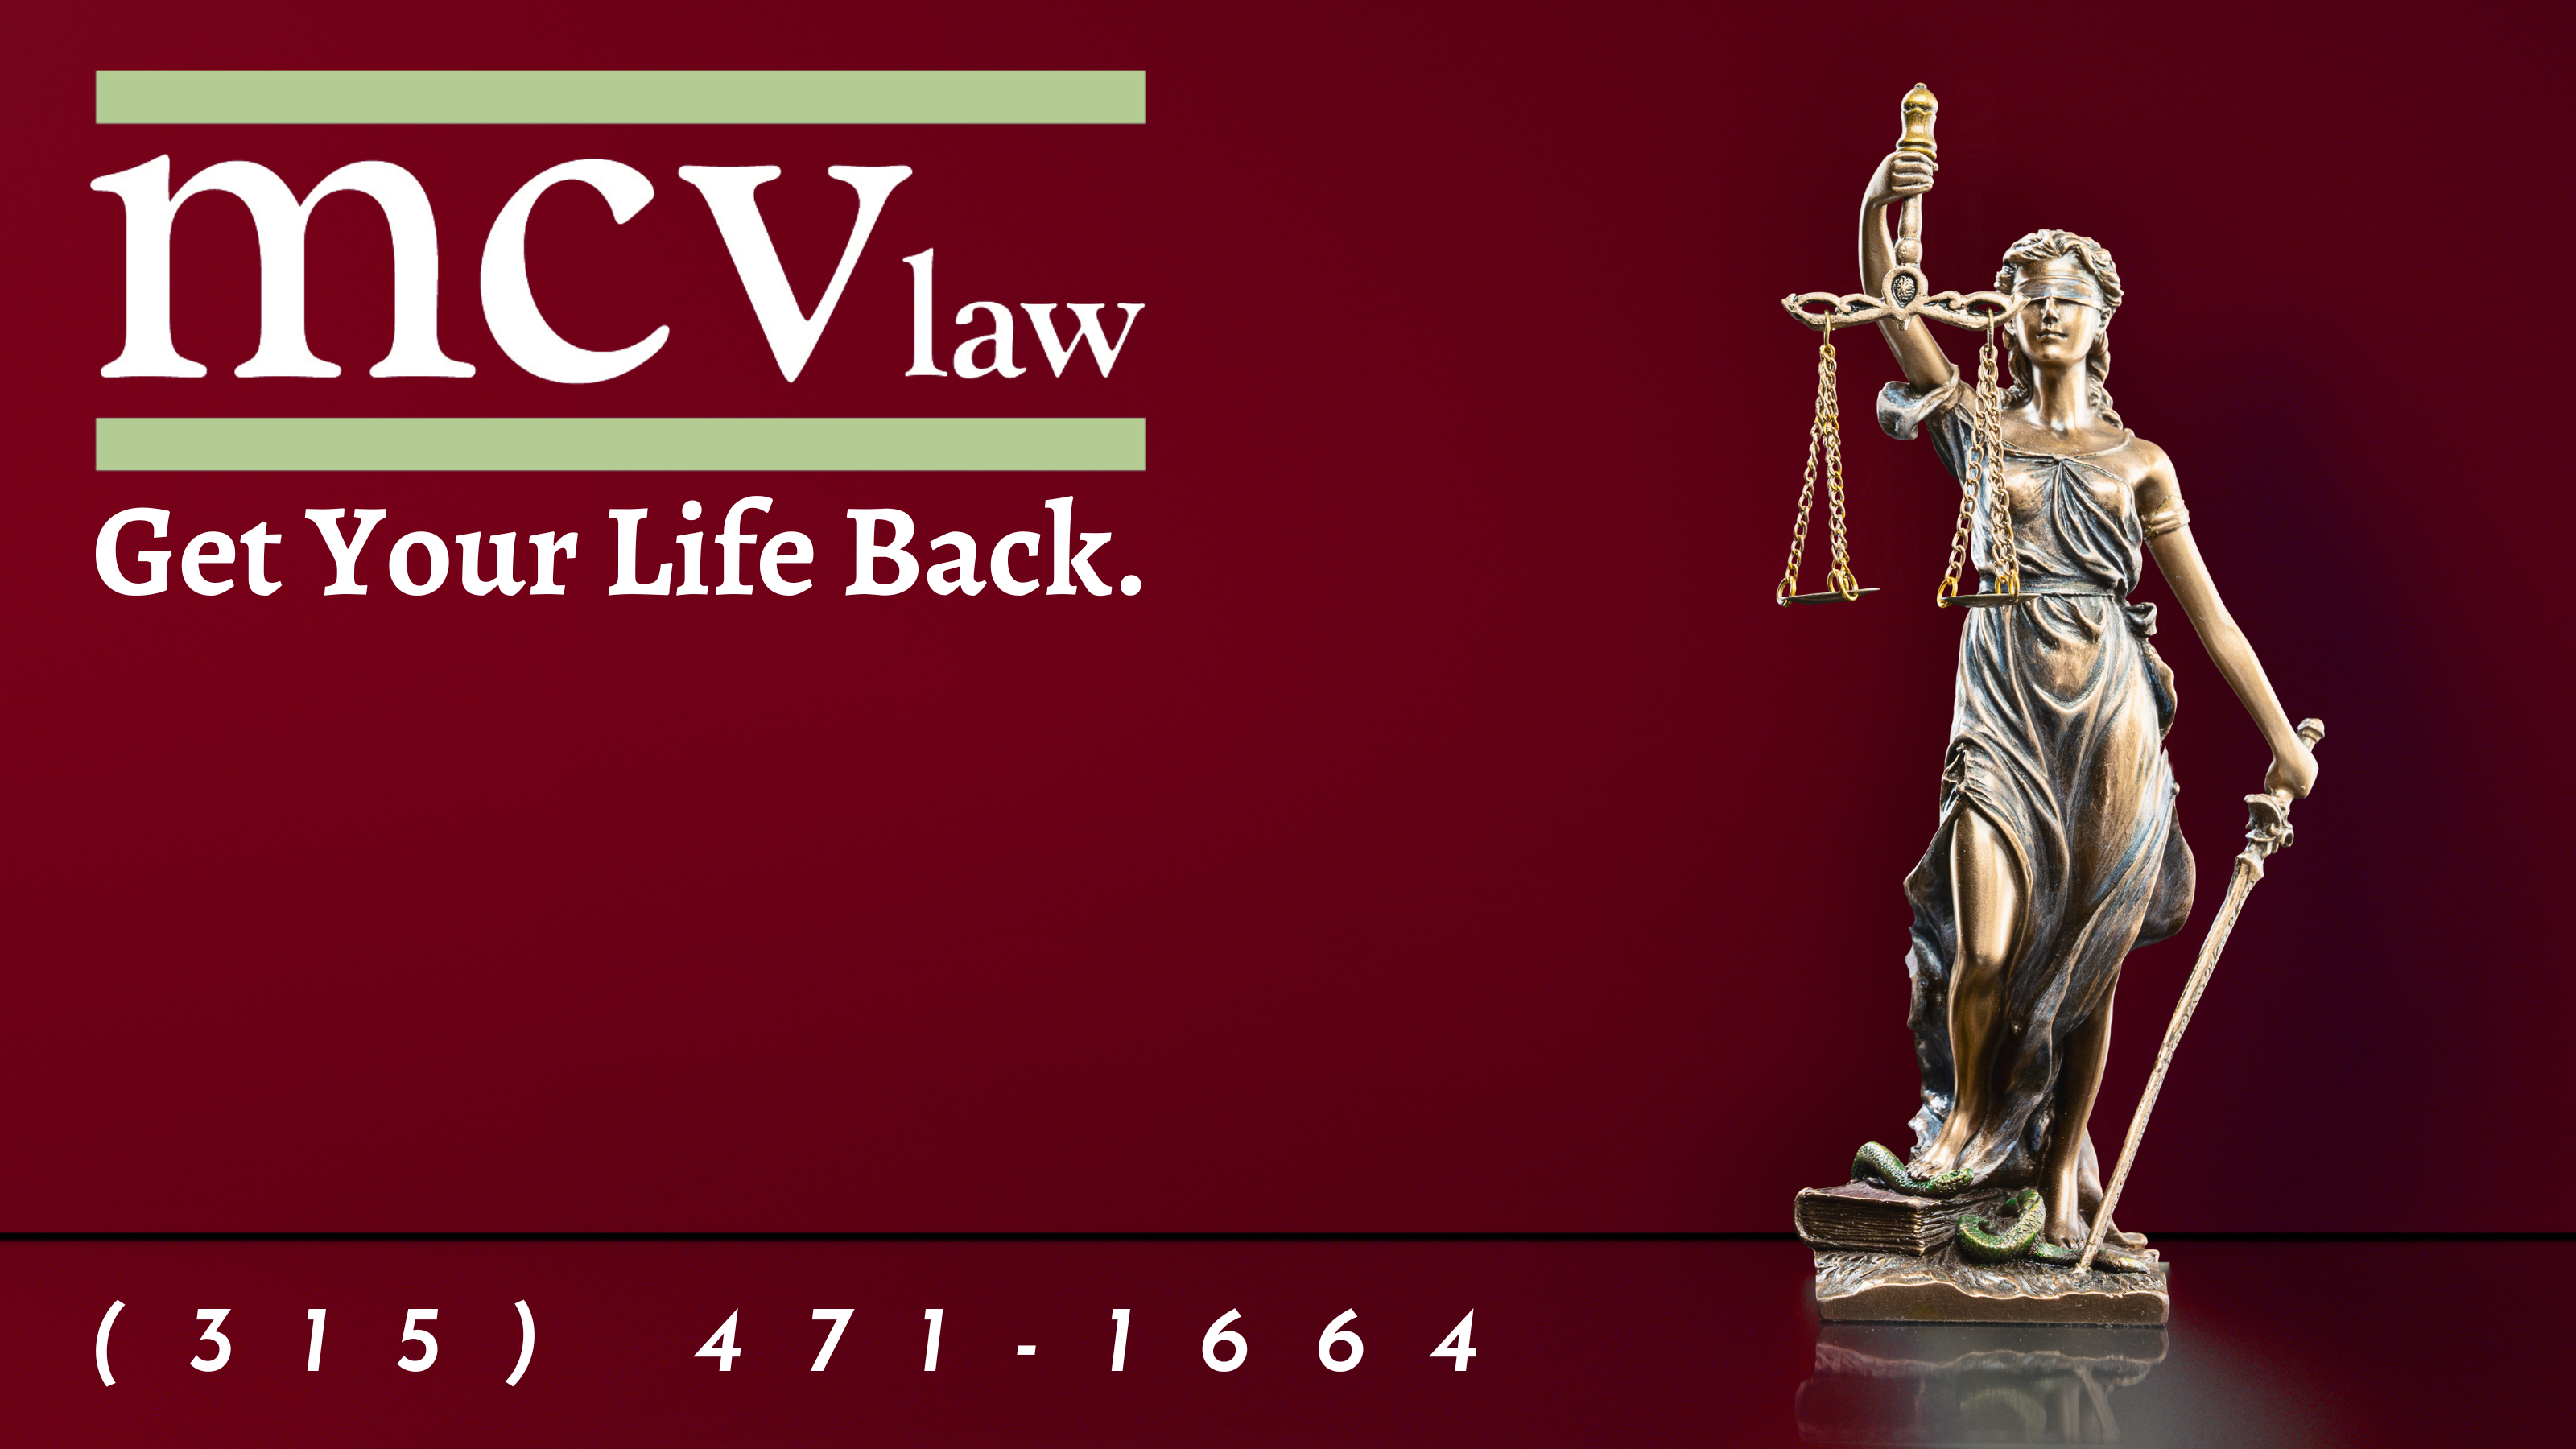 workers comp law firm phone number